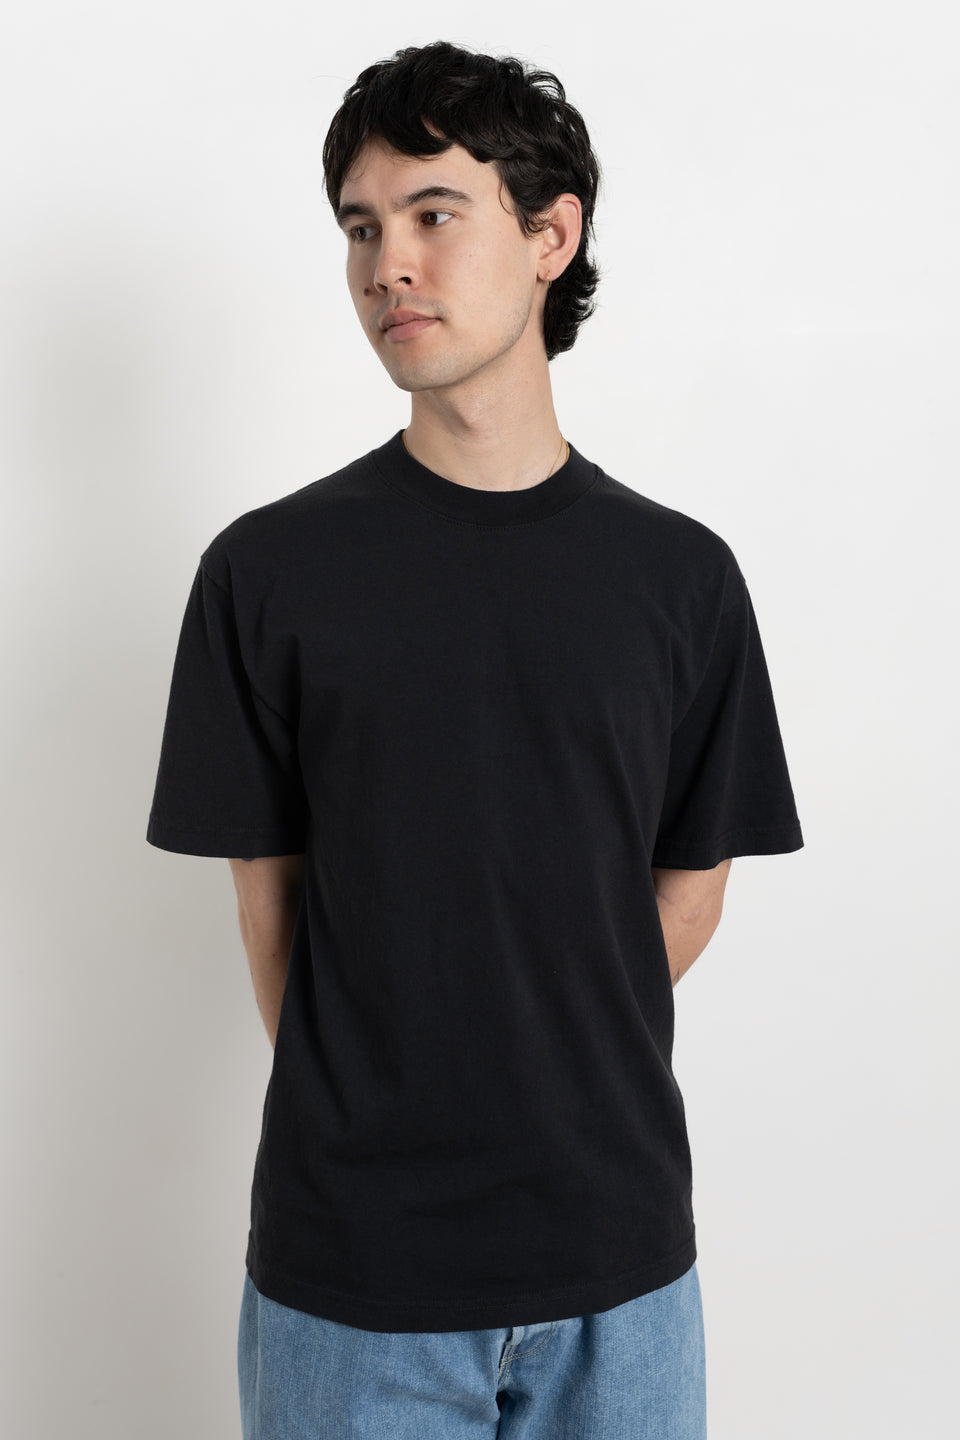 Garment Dyed US Cotton Tee Black Men's Made in USA Calculus Online